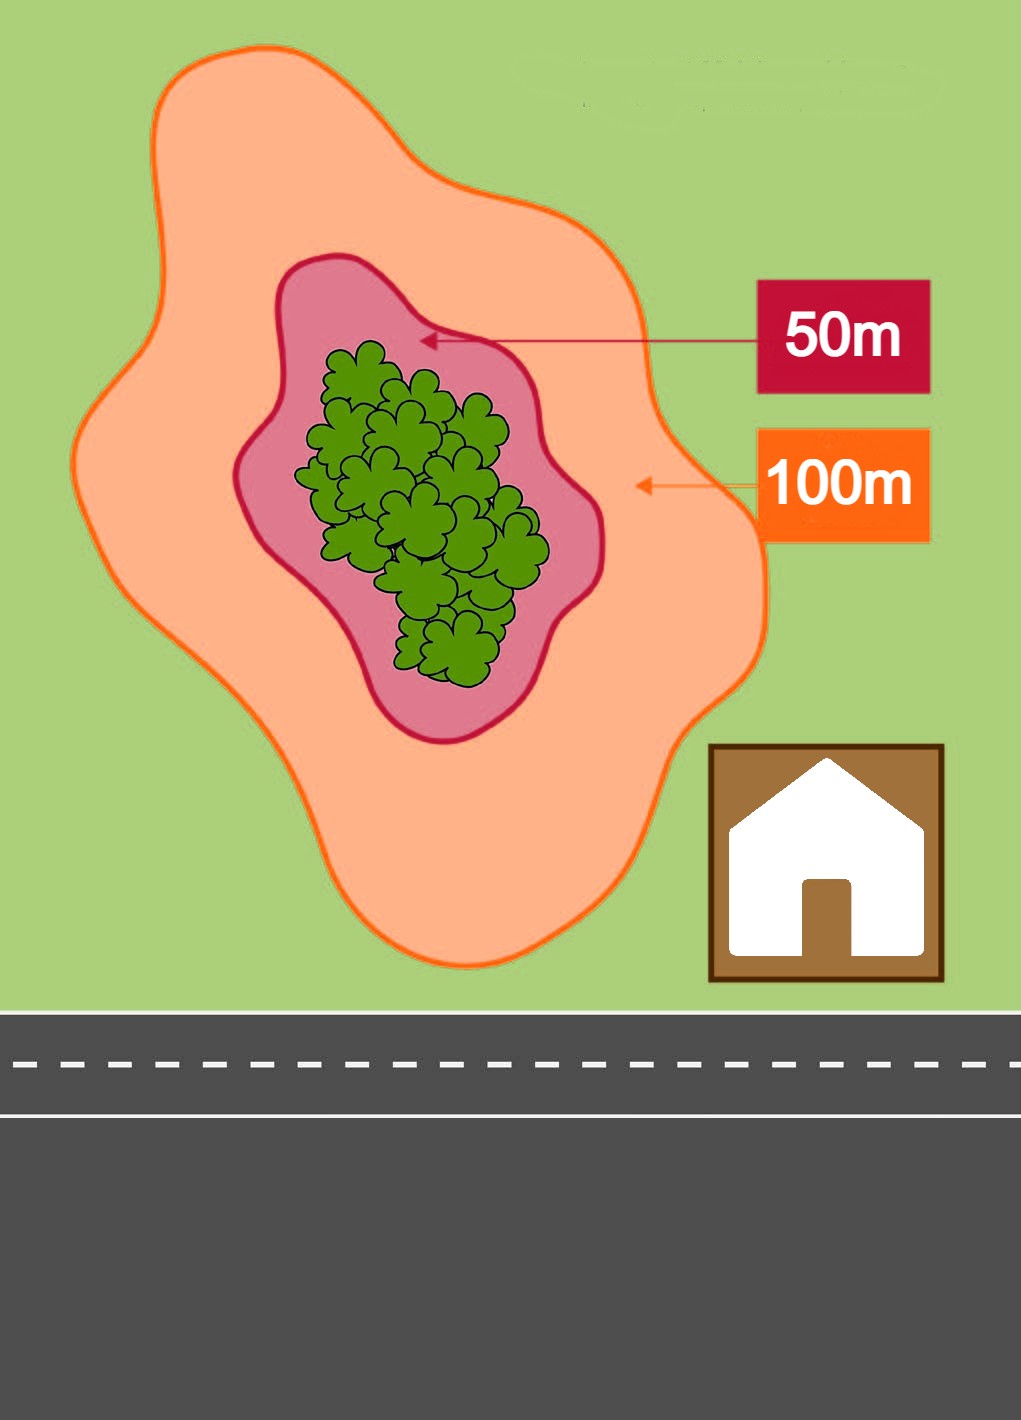 Diagram of Melaleuca irbyana (Swamp tea tree) surrounded by a 50 metre buffer zone to protect from edge effects and a 100 metre buffer zone to protect hydrology.